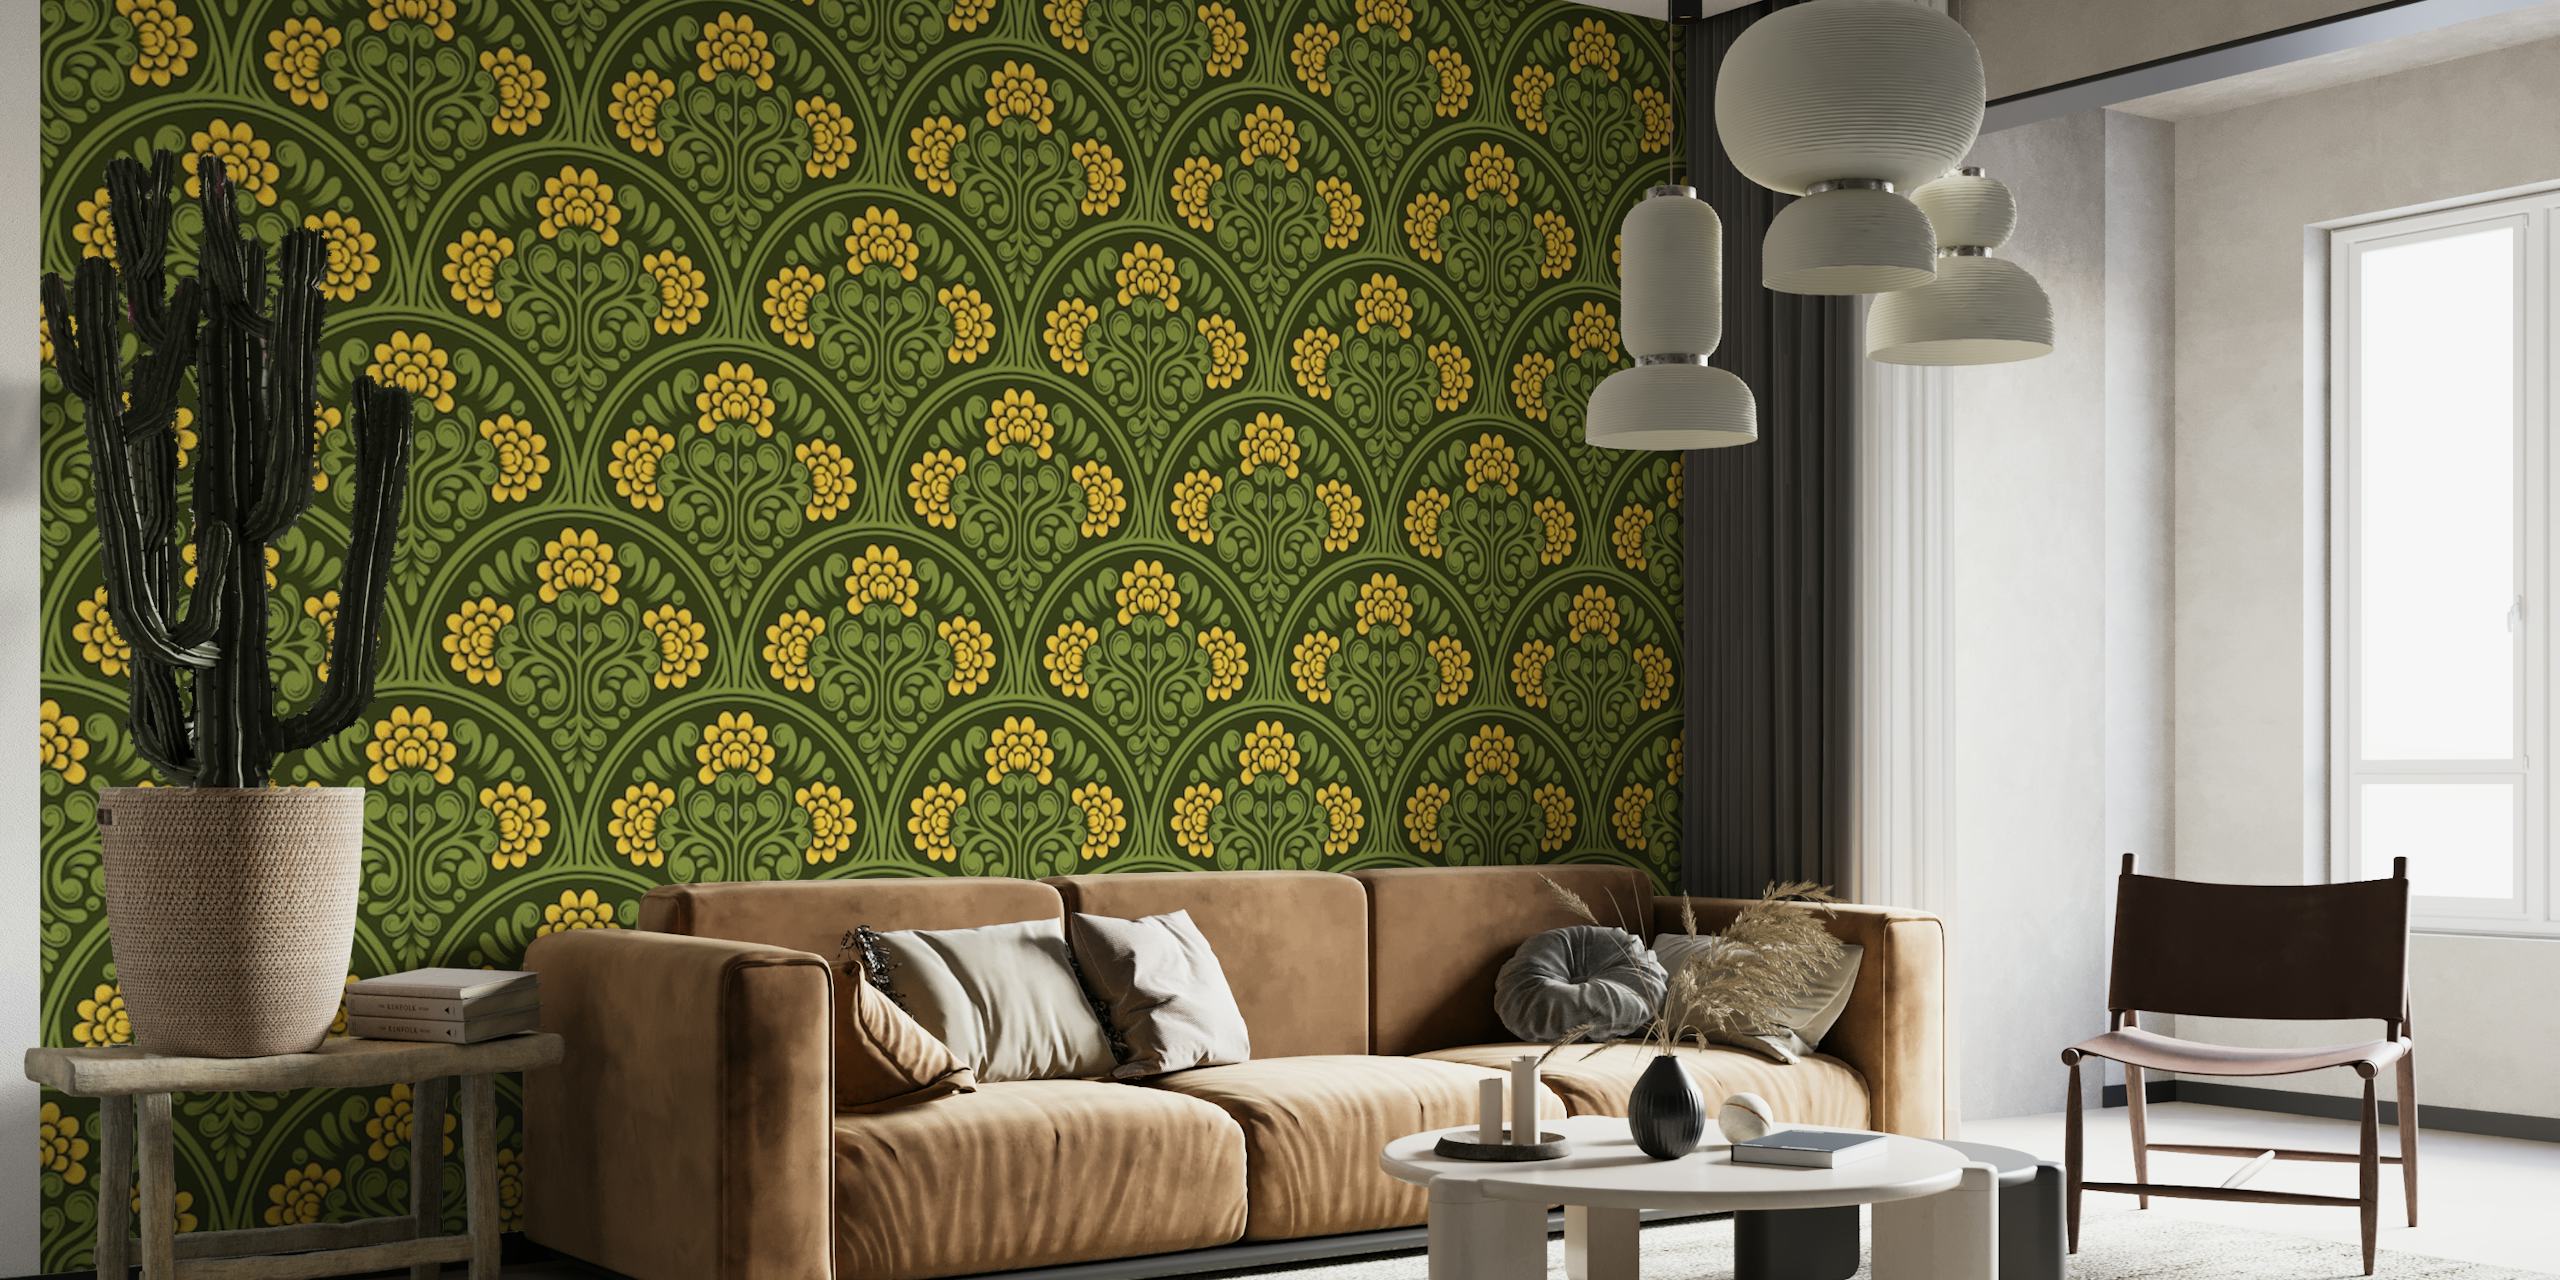 Yellow flowers pattern wall mural with green background